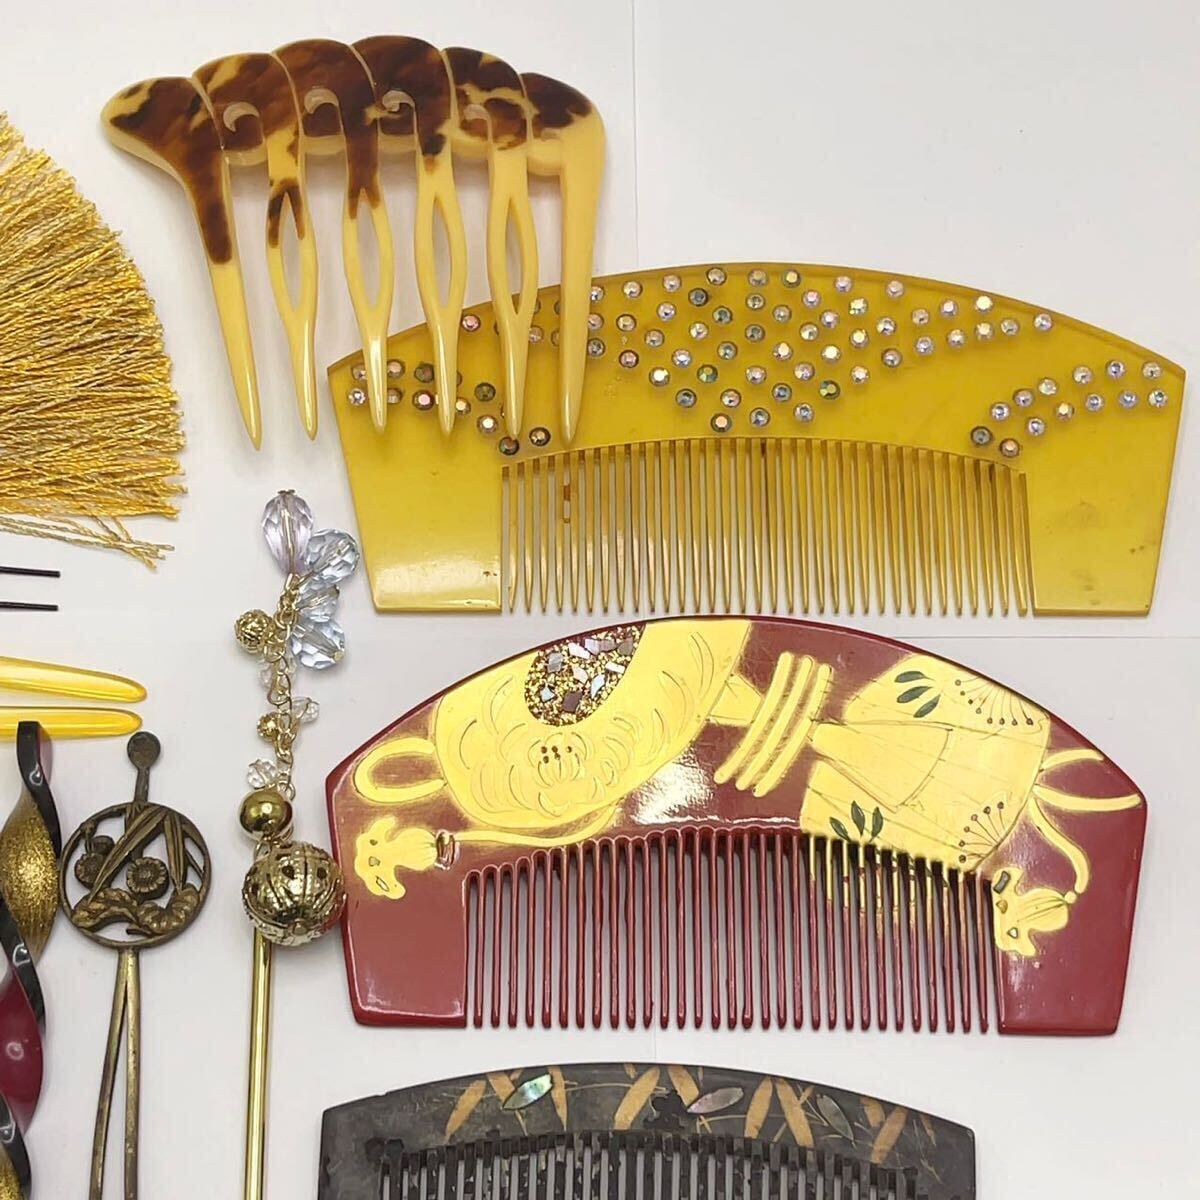 1 jpy [ author thing contains ] era thing kimono small articles .. other together 19 point set comb ornamental hairpin . stop hair ornament lacquer lacqering tortoise shell equipped hair accessory 